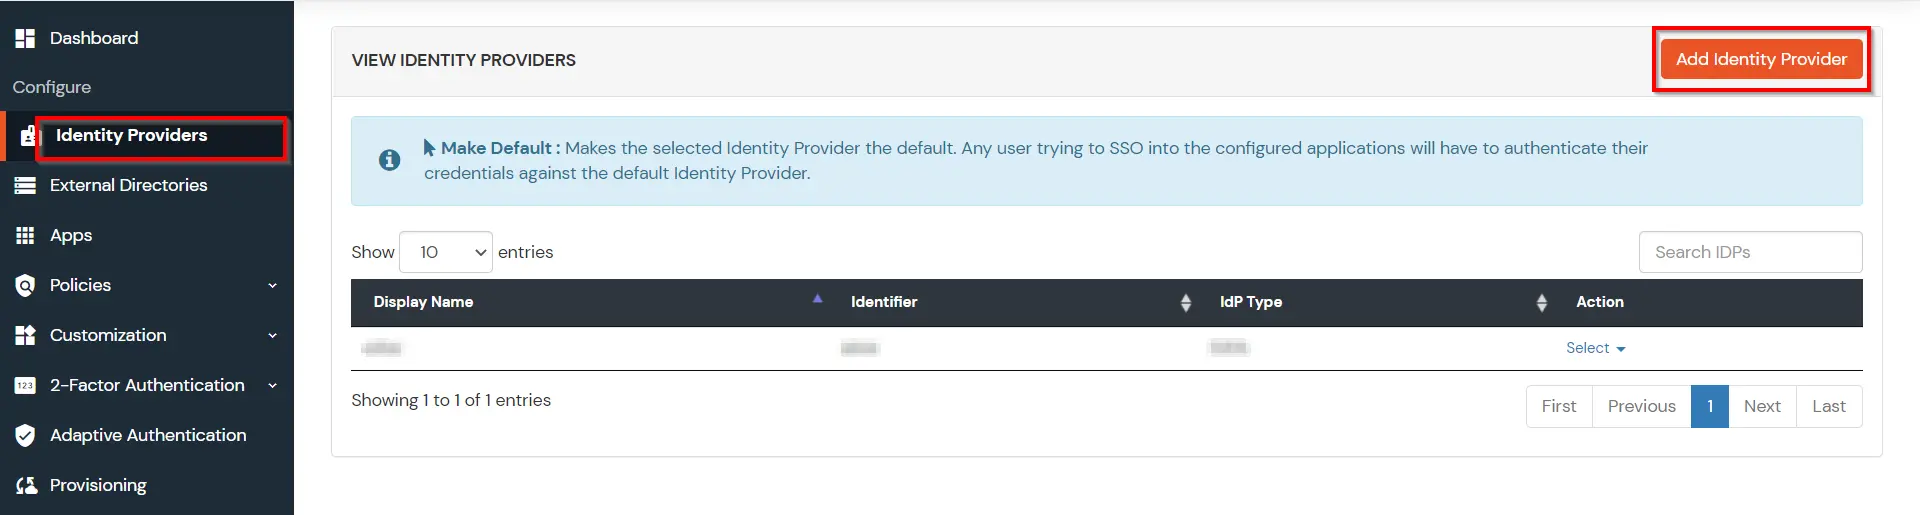 Select Identity Provider to add Microsoft Entra ID as IDP